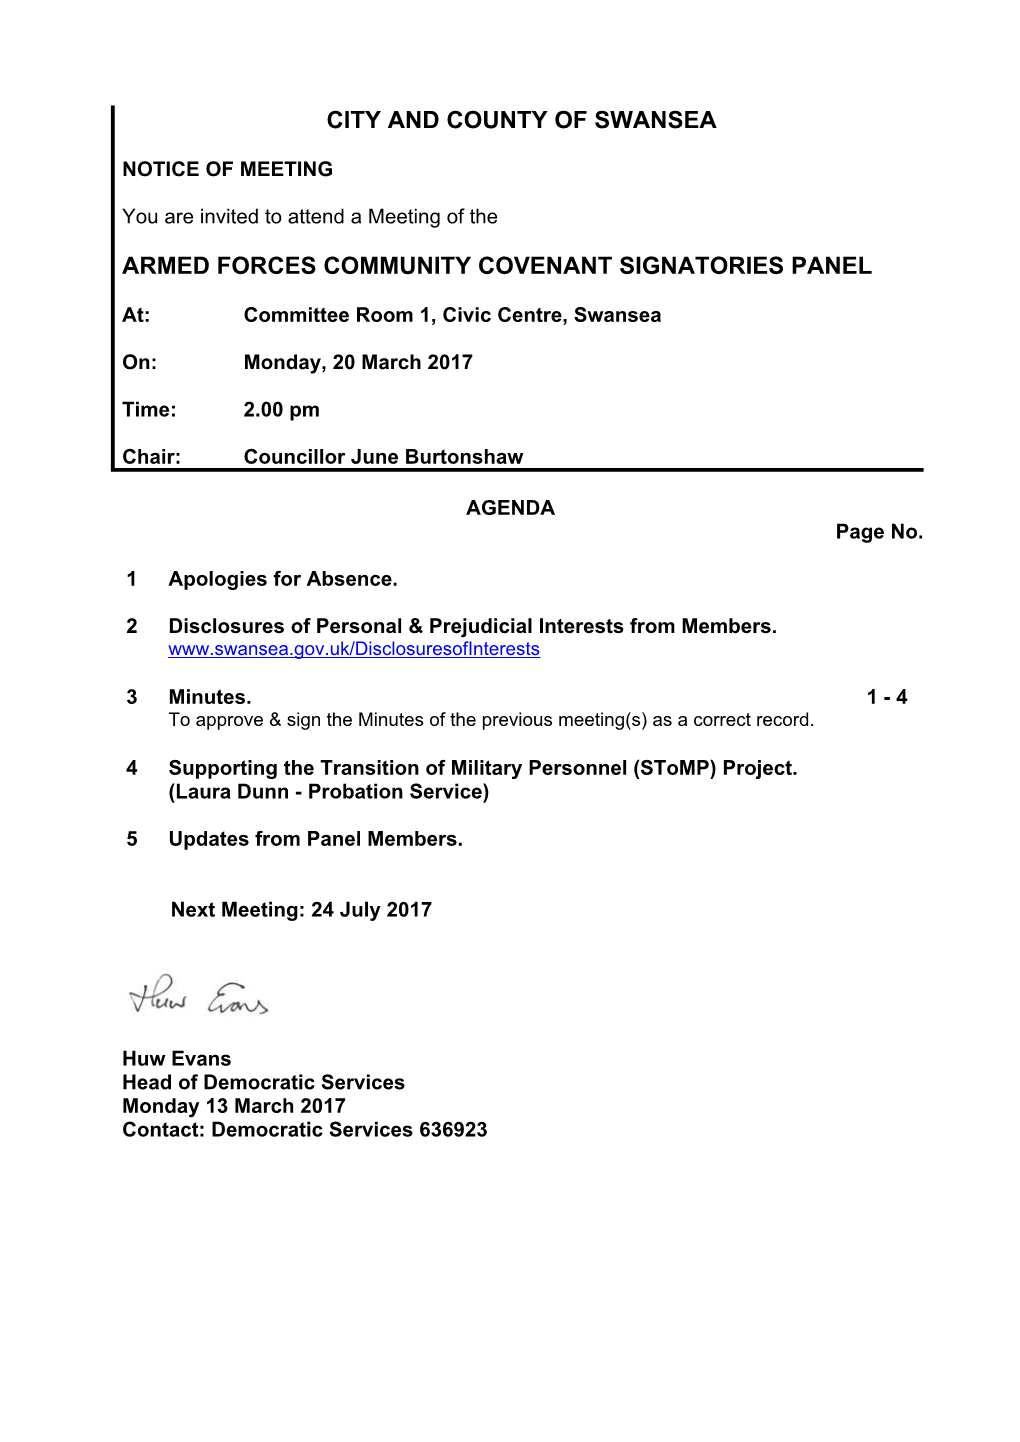 (Public Pack)Agenda Document for Armed Forces Community